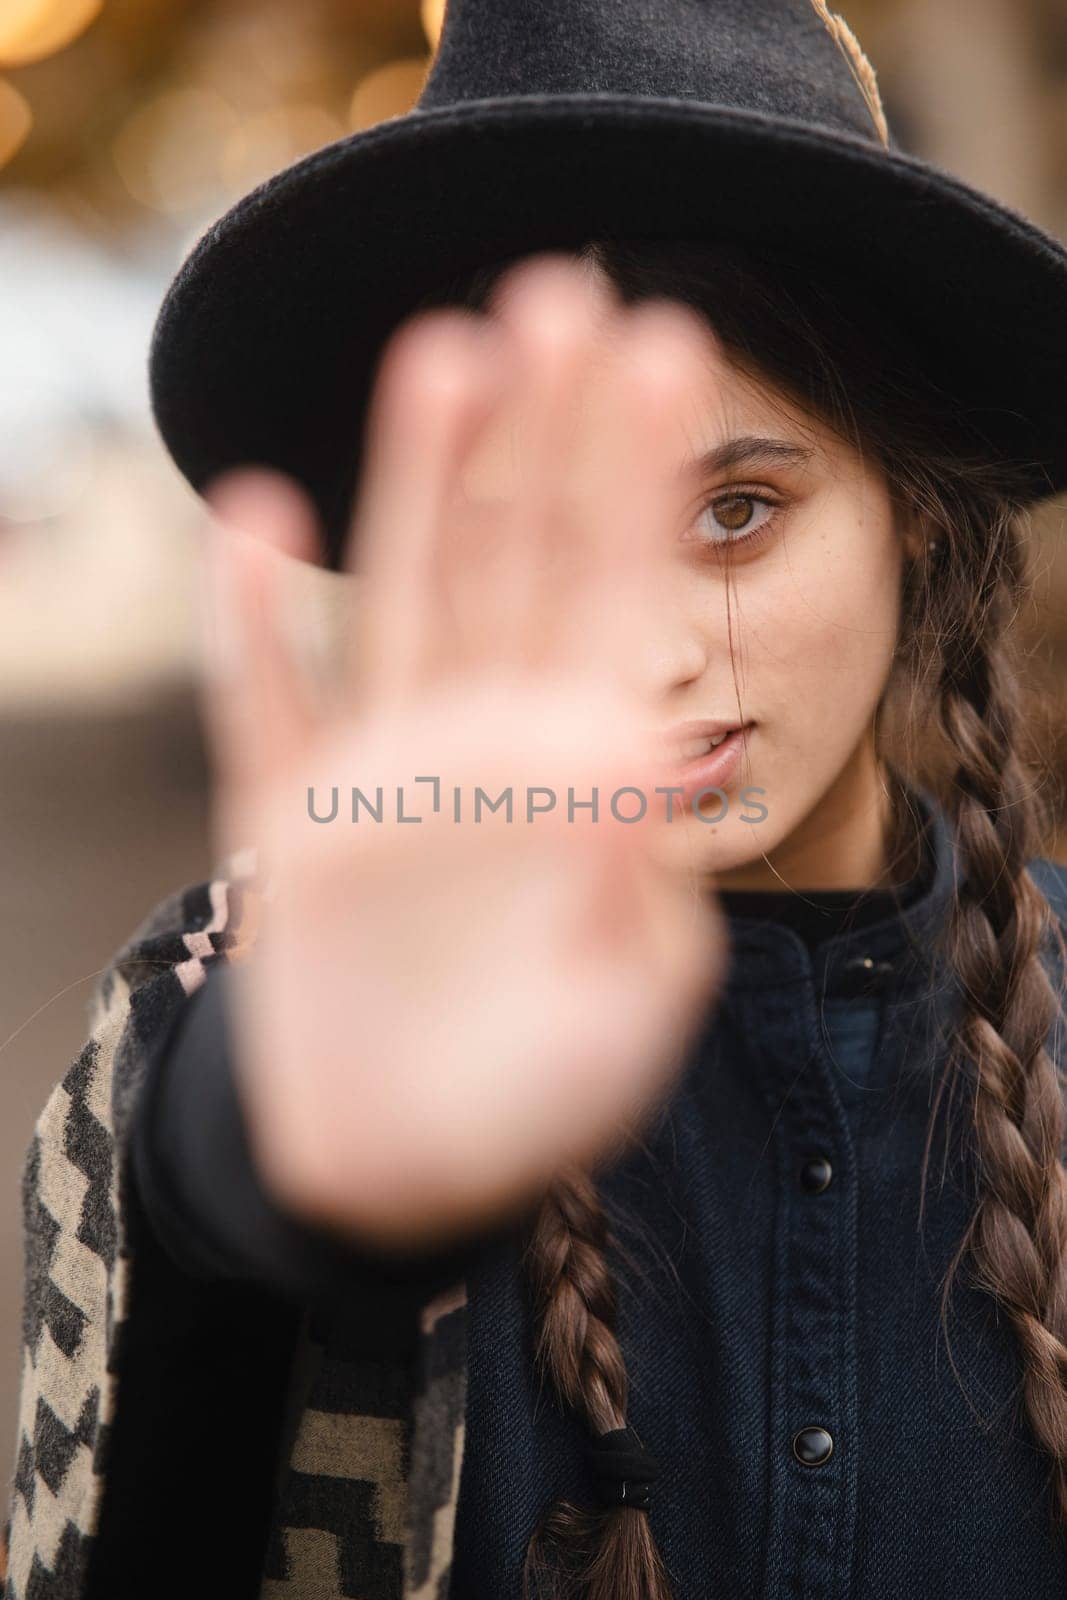 A chic girl in bohemian attire, accessorized with a black hat, enjoys the autumn ambiance of the city. by teksomolika